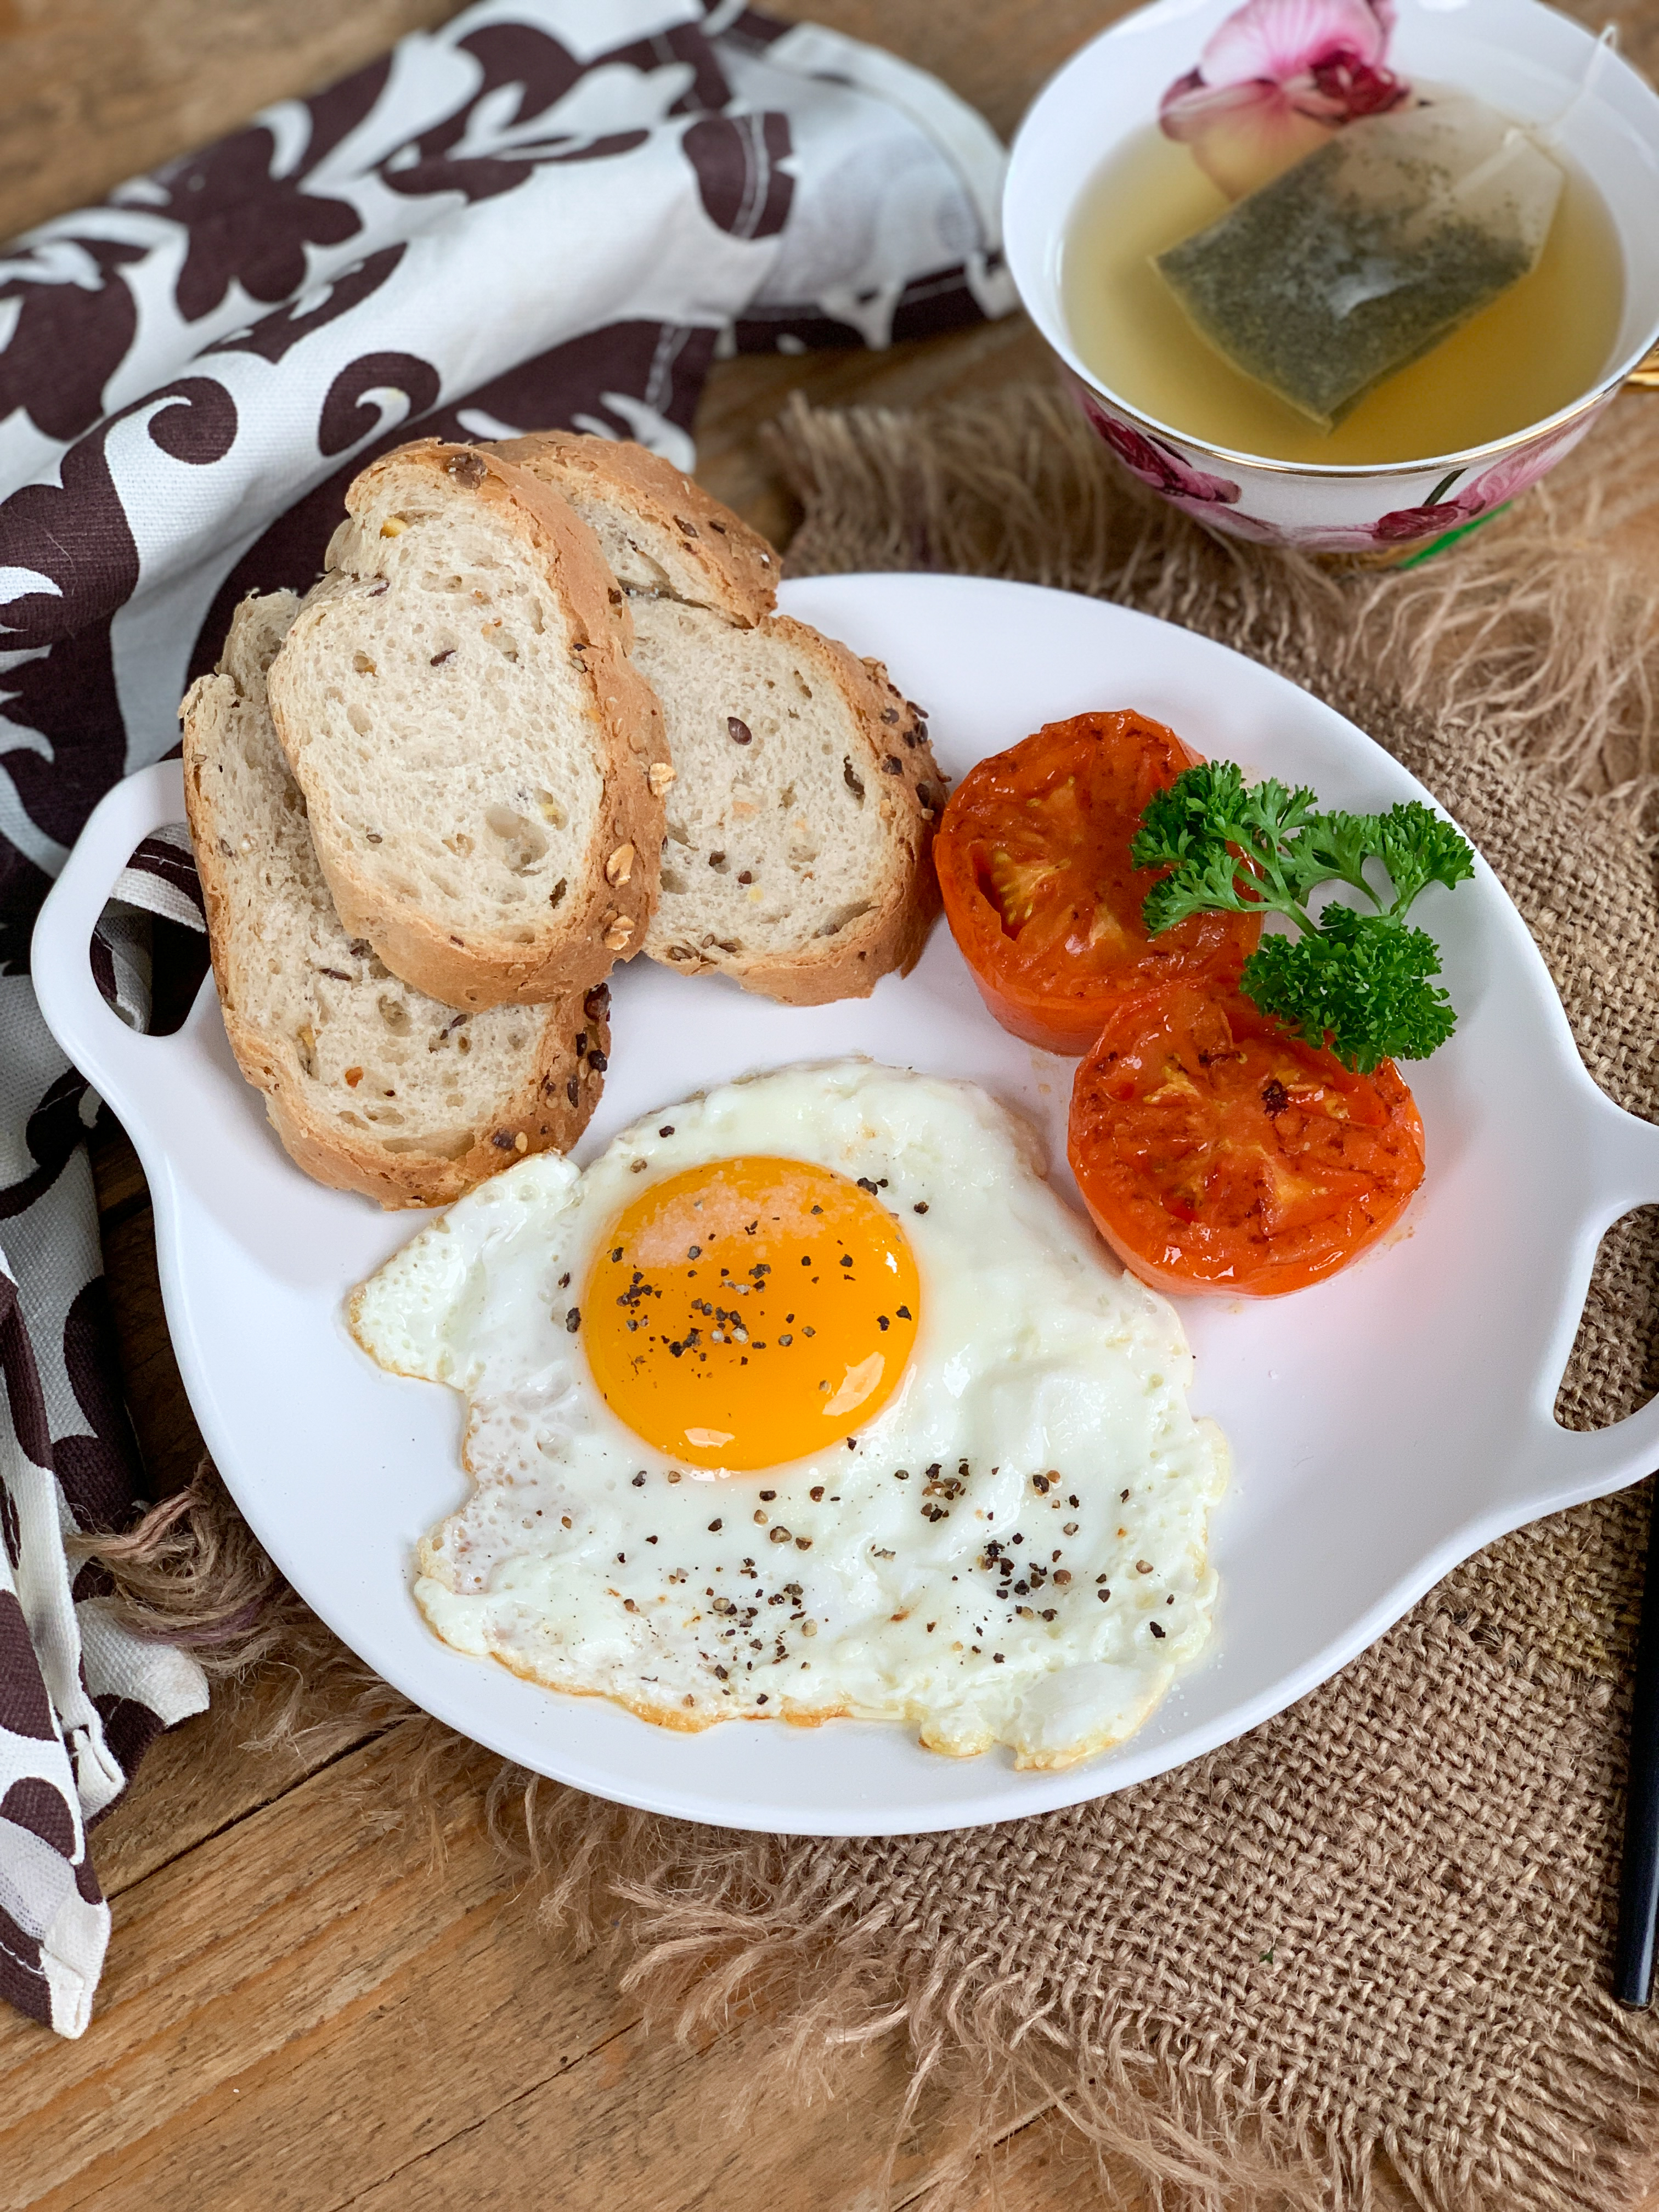 Video: How to Make a Sunny Side Up Egg